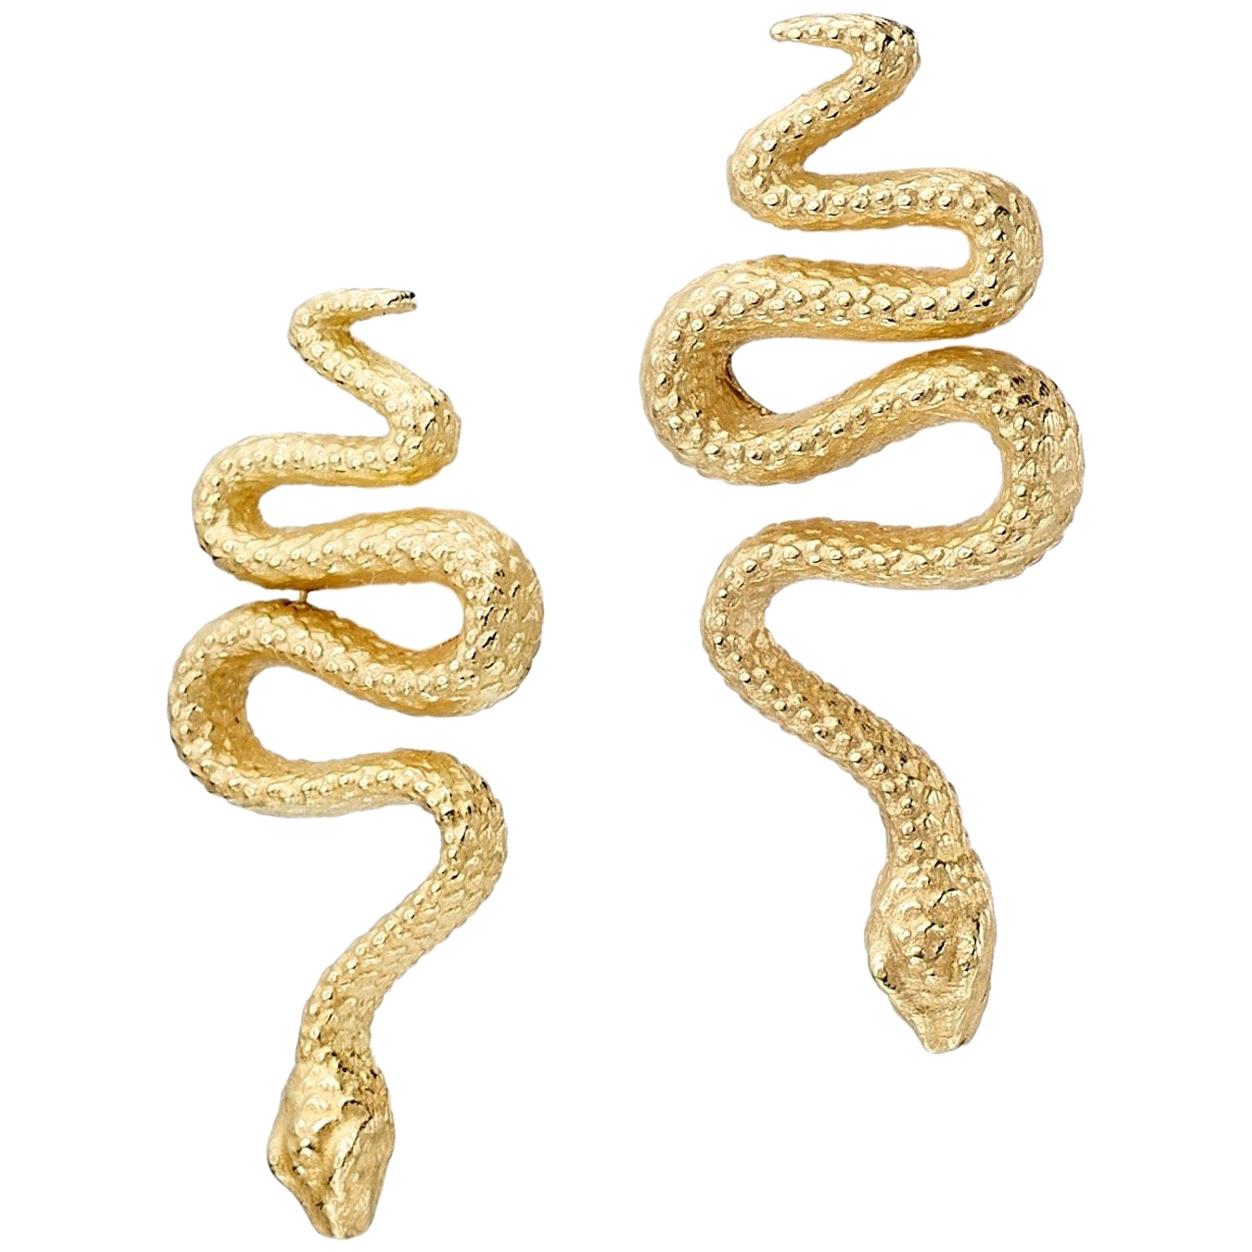 Lilly Hastedt 18 Karat Yellow Gold Snake Stud Earrings For Sale